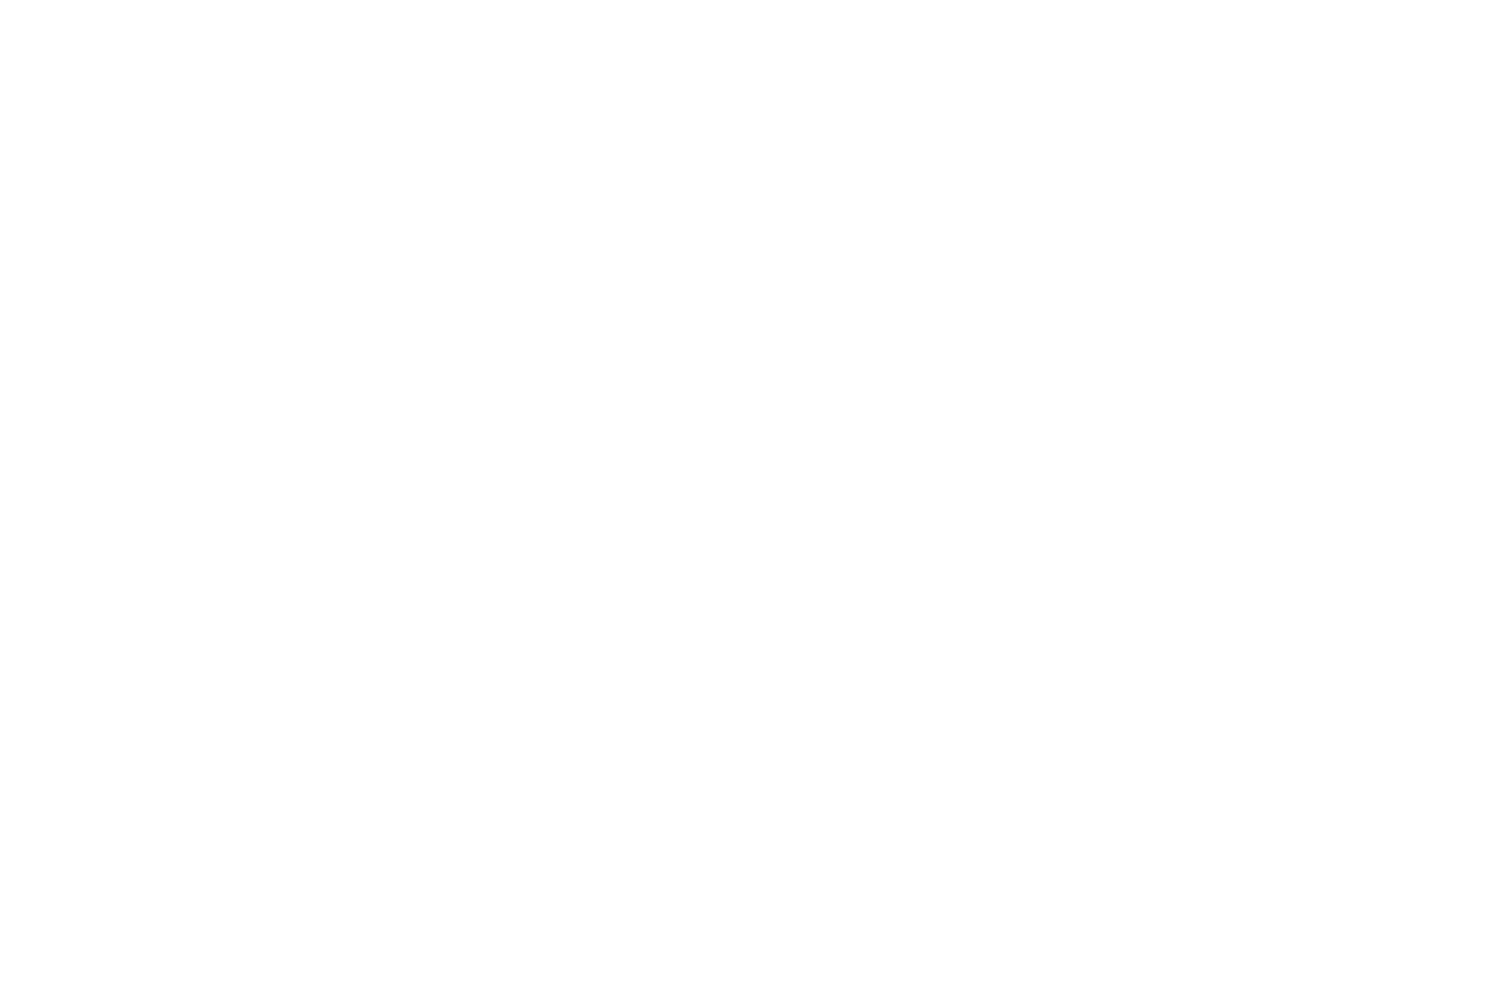 Christopher Carl Images